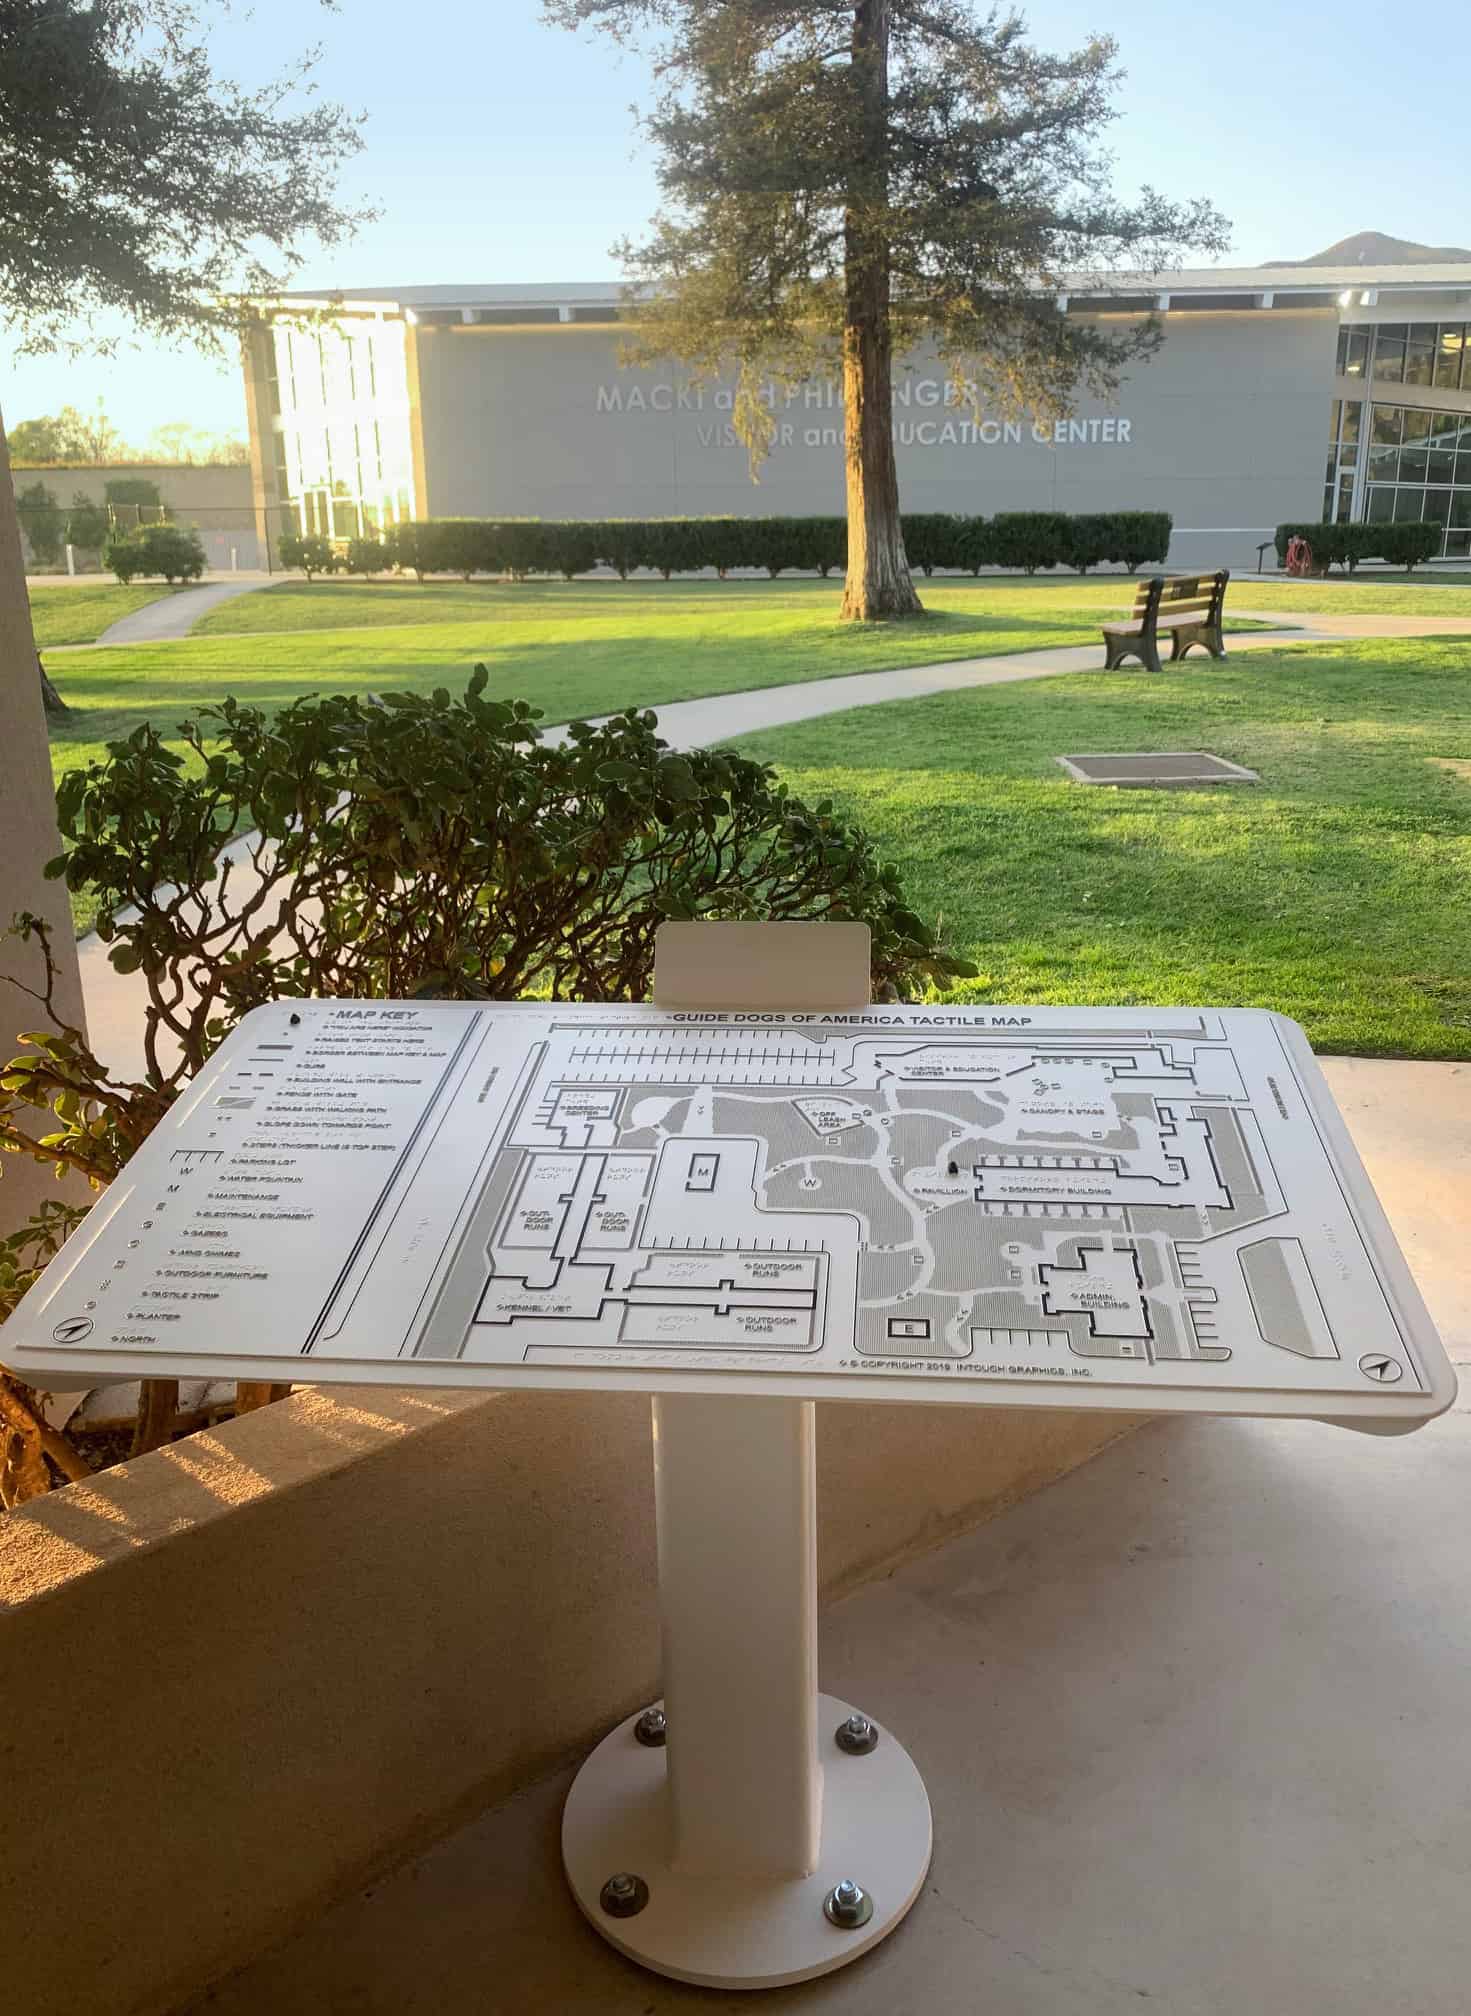 Tactile map mounted on outdoor post, Guide Dogs of America campus